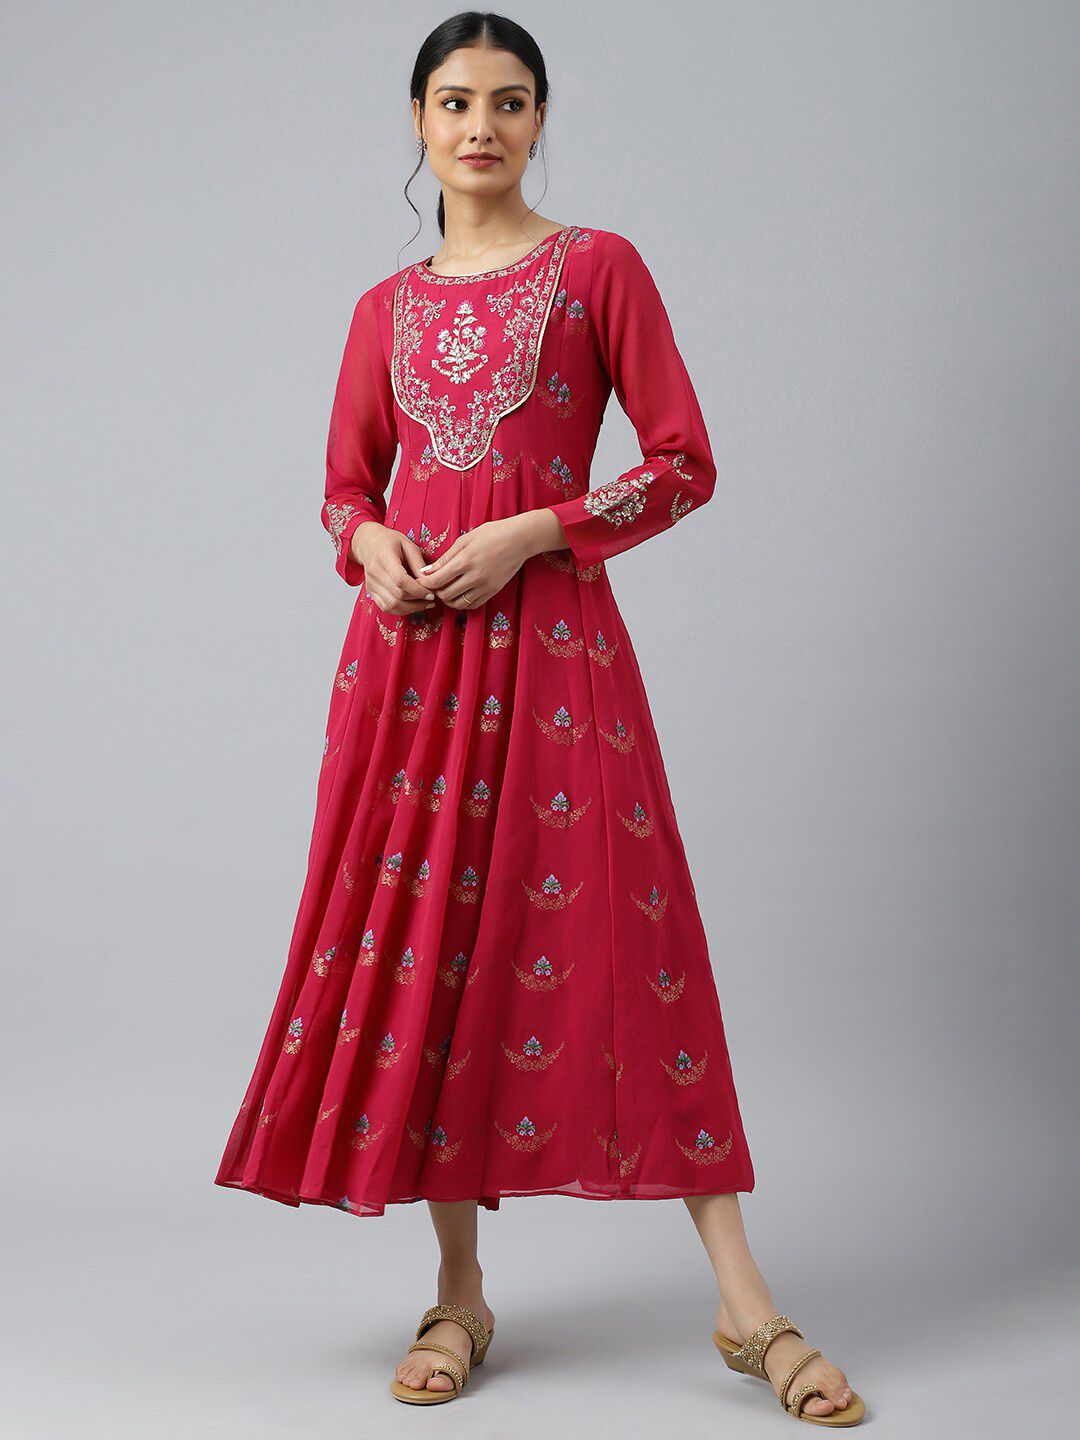 WISHFUL Pink Floral Embroidered Georgette Ethnic Maxi Dress Price in India